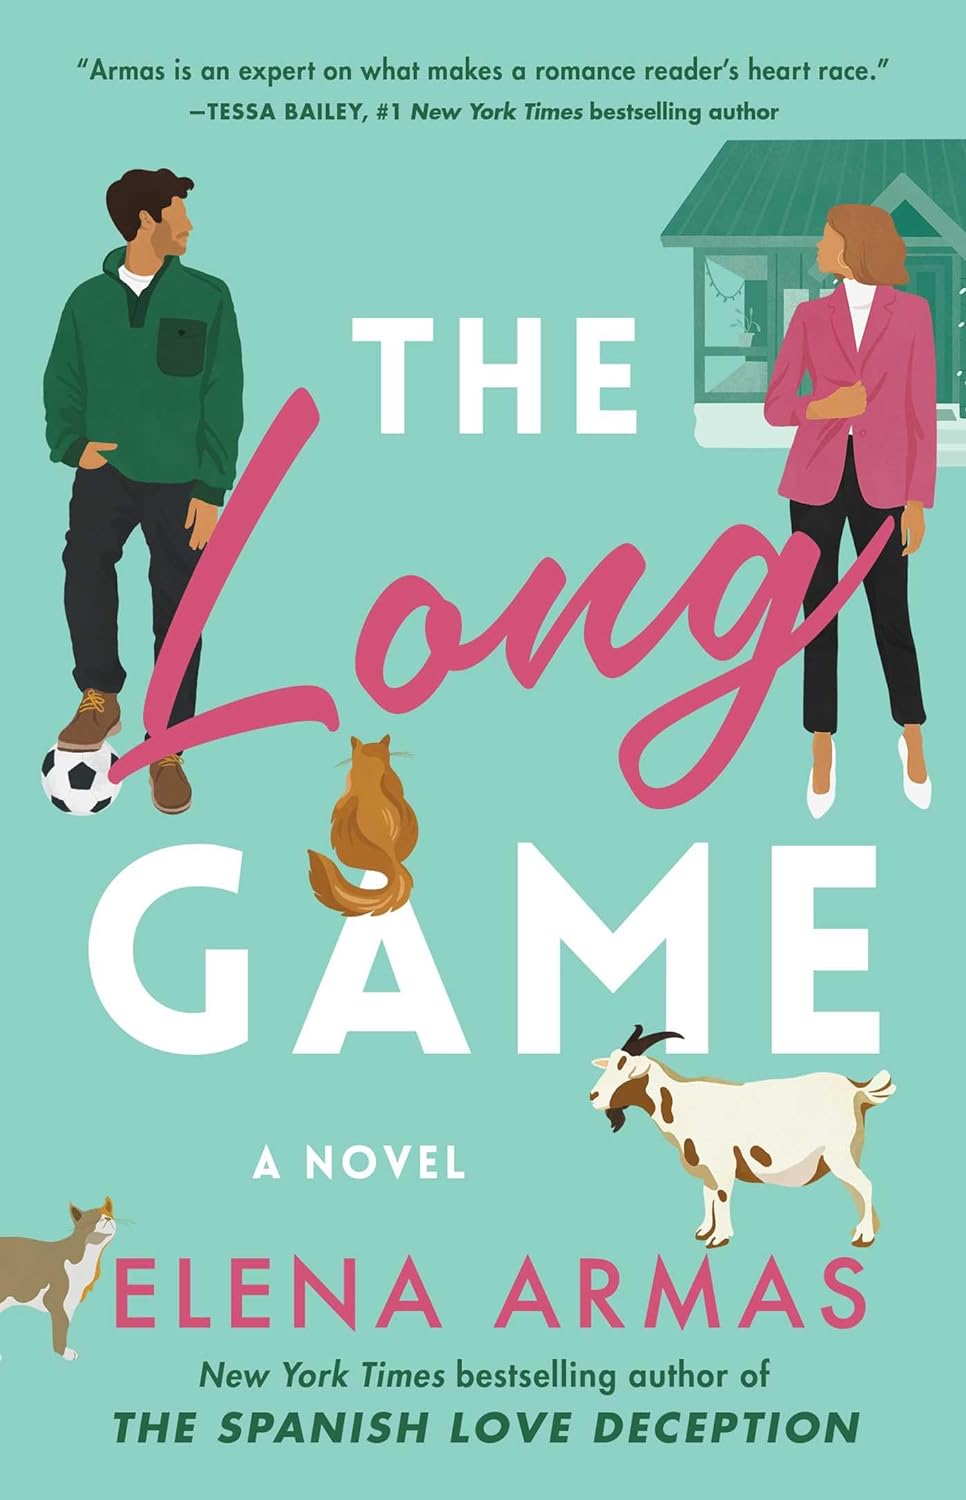 Image for "The Long Game"